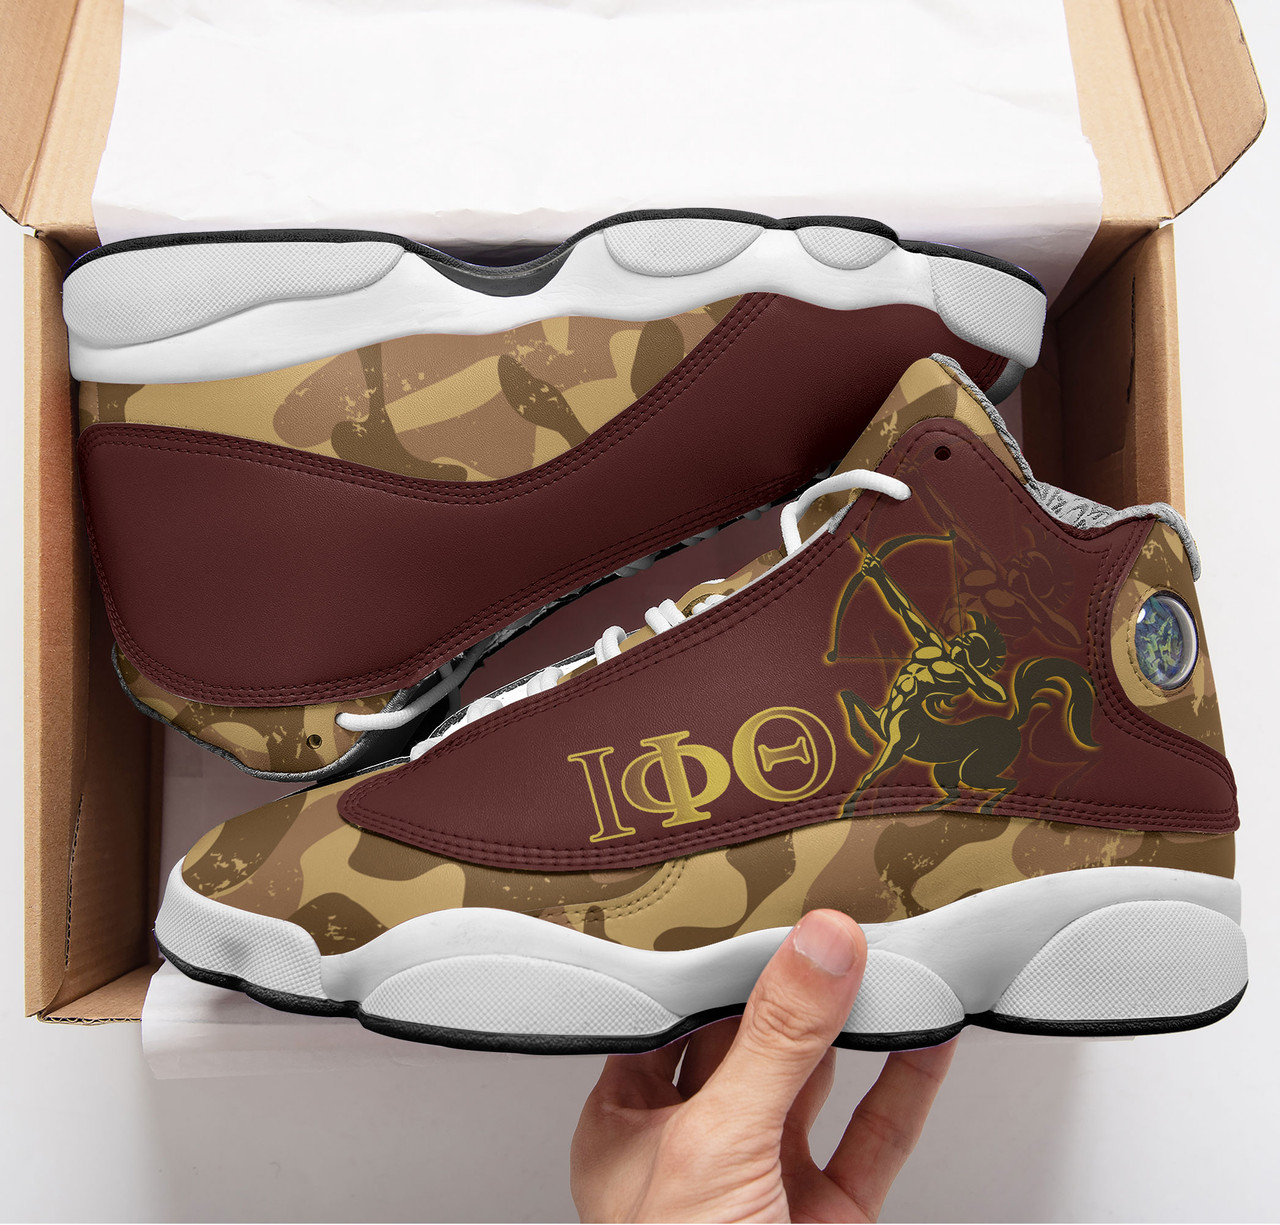 Iota Phi Theta High Top Basketball Shoes J 13 - Fraternity Hand Gesture Camouflage Patterns High Top Sneakers J 13